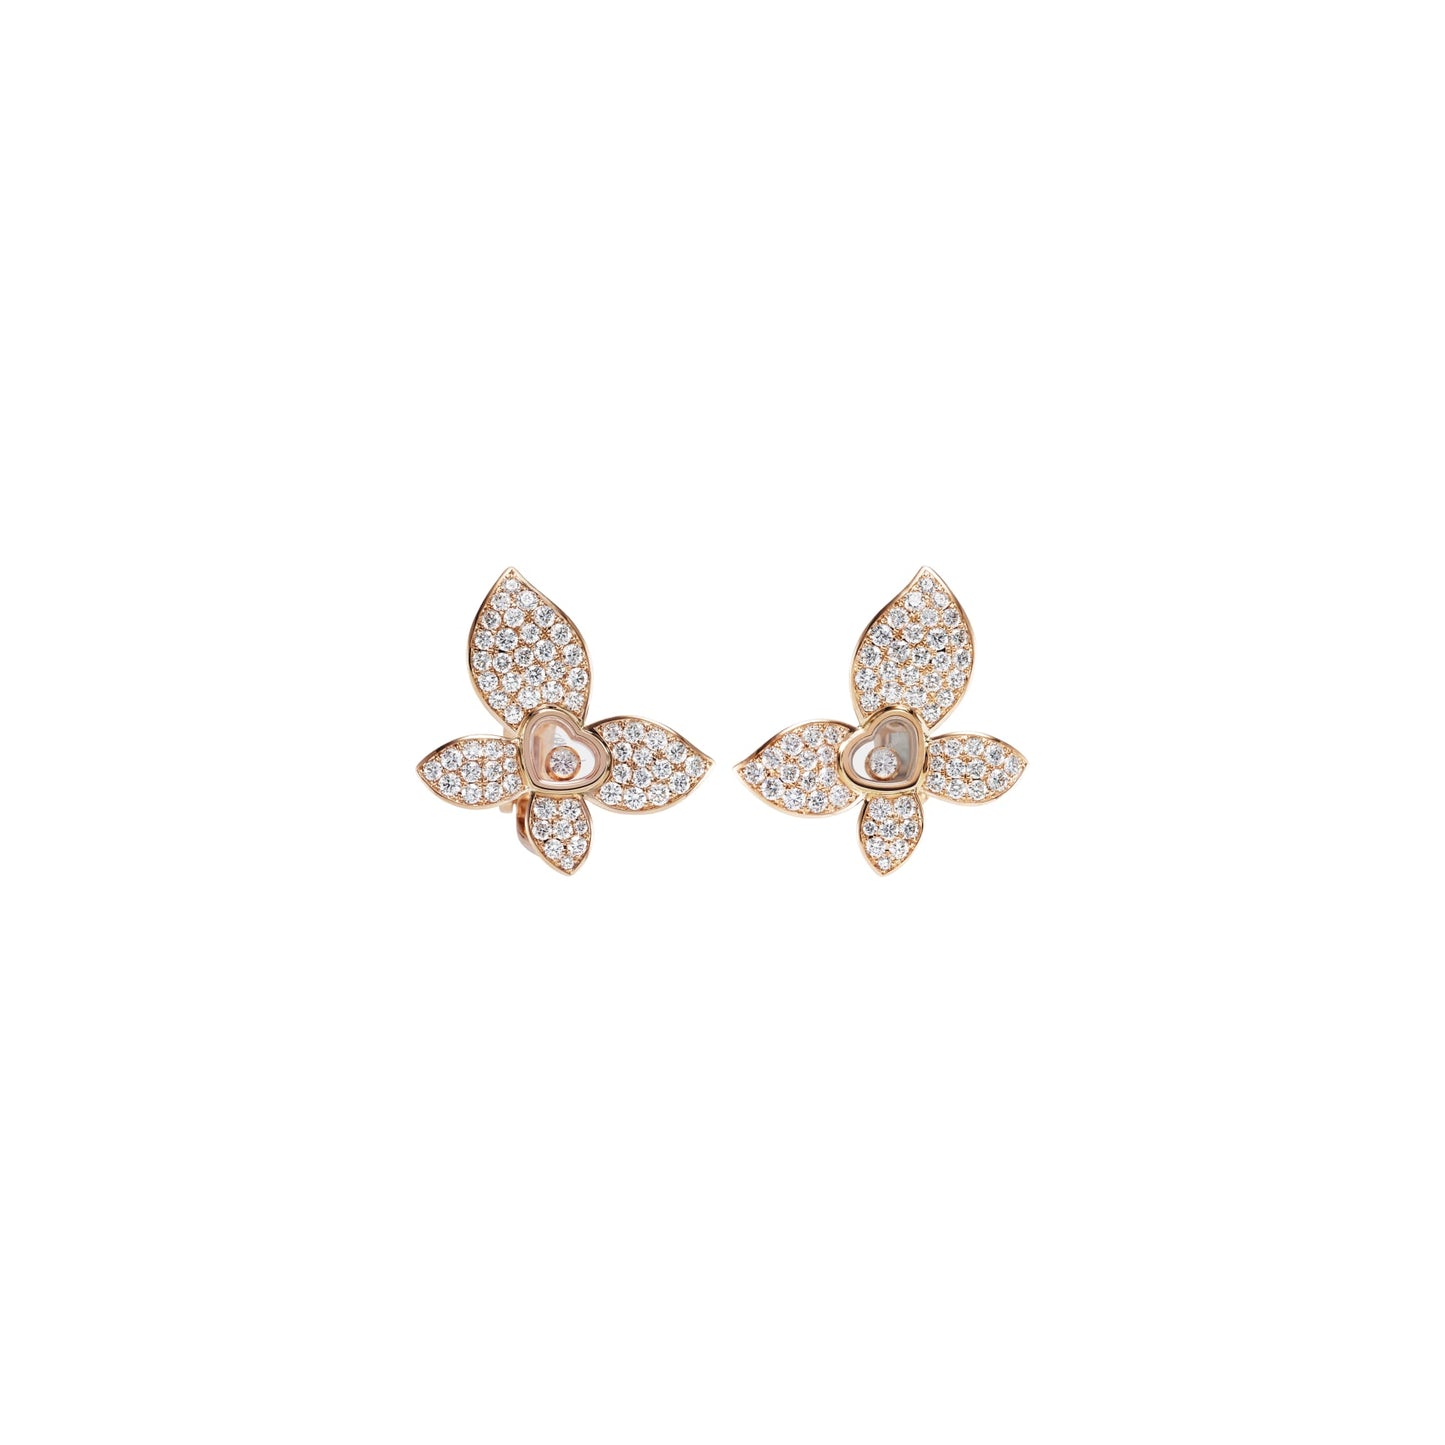 HAPPY BUTTERFLY X MARIAH CAREY EARRINGS, ETHICAL ROSE GOLD, DIAMONDS 848536-5001